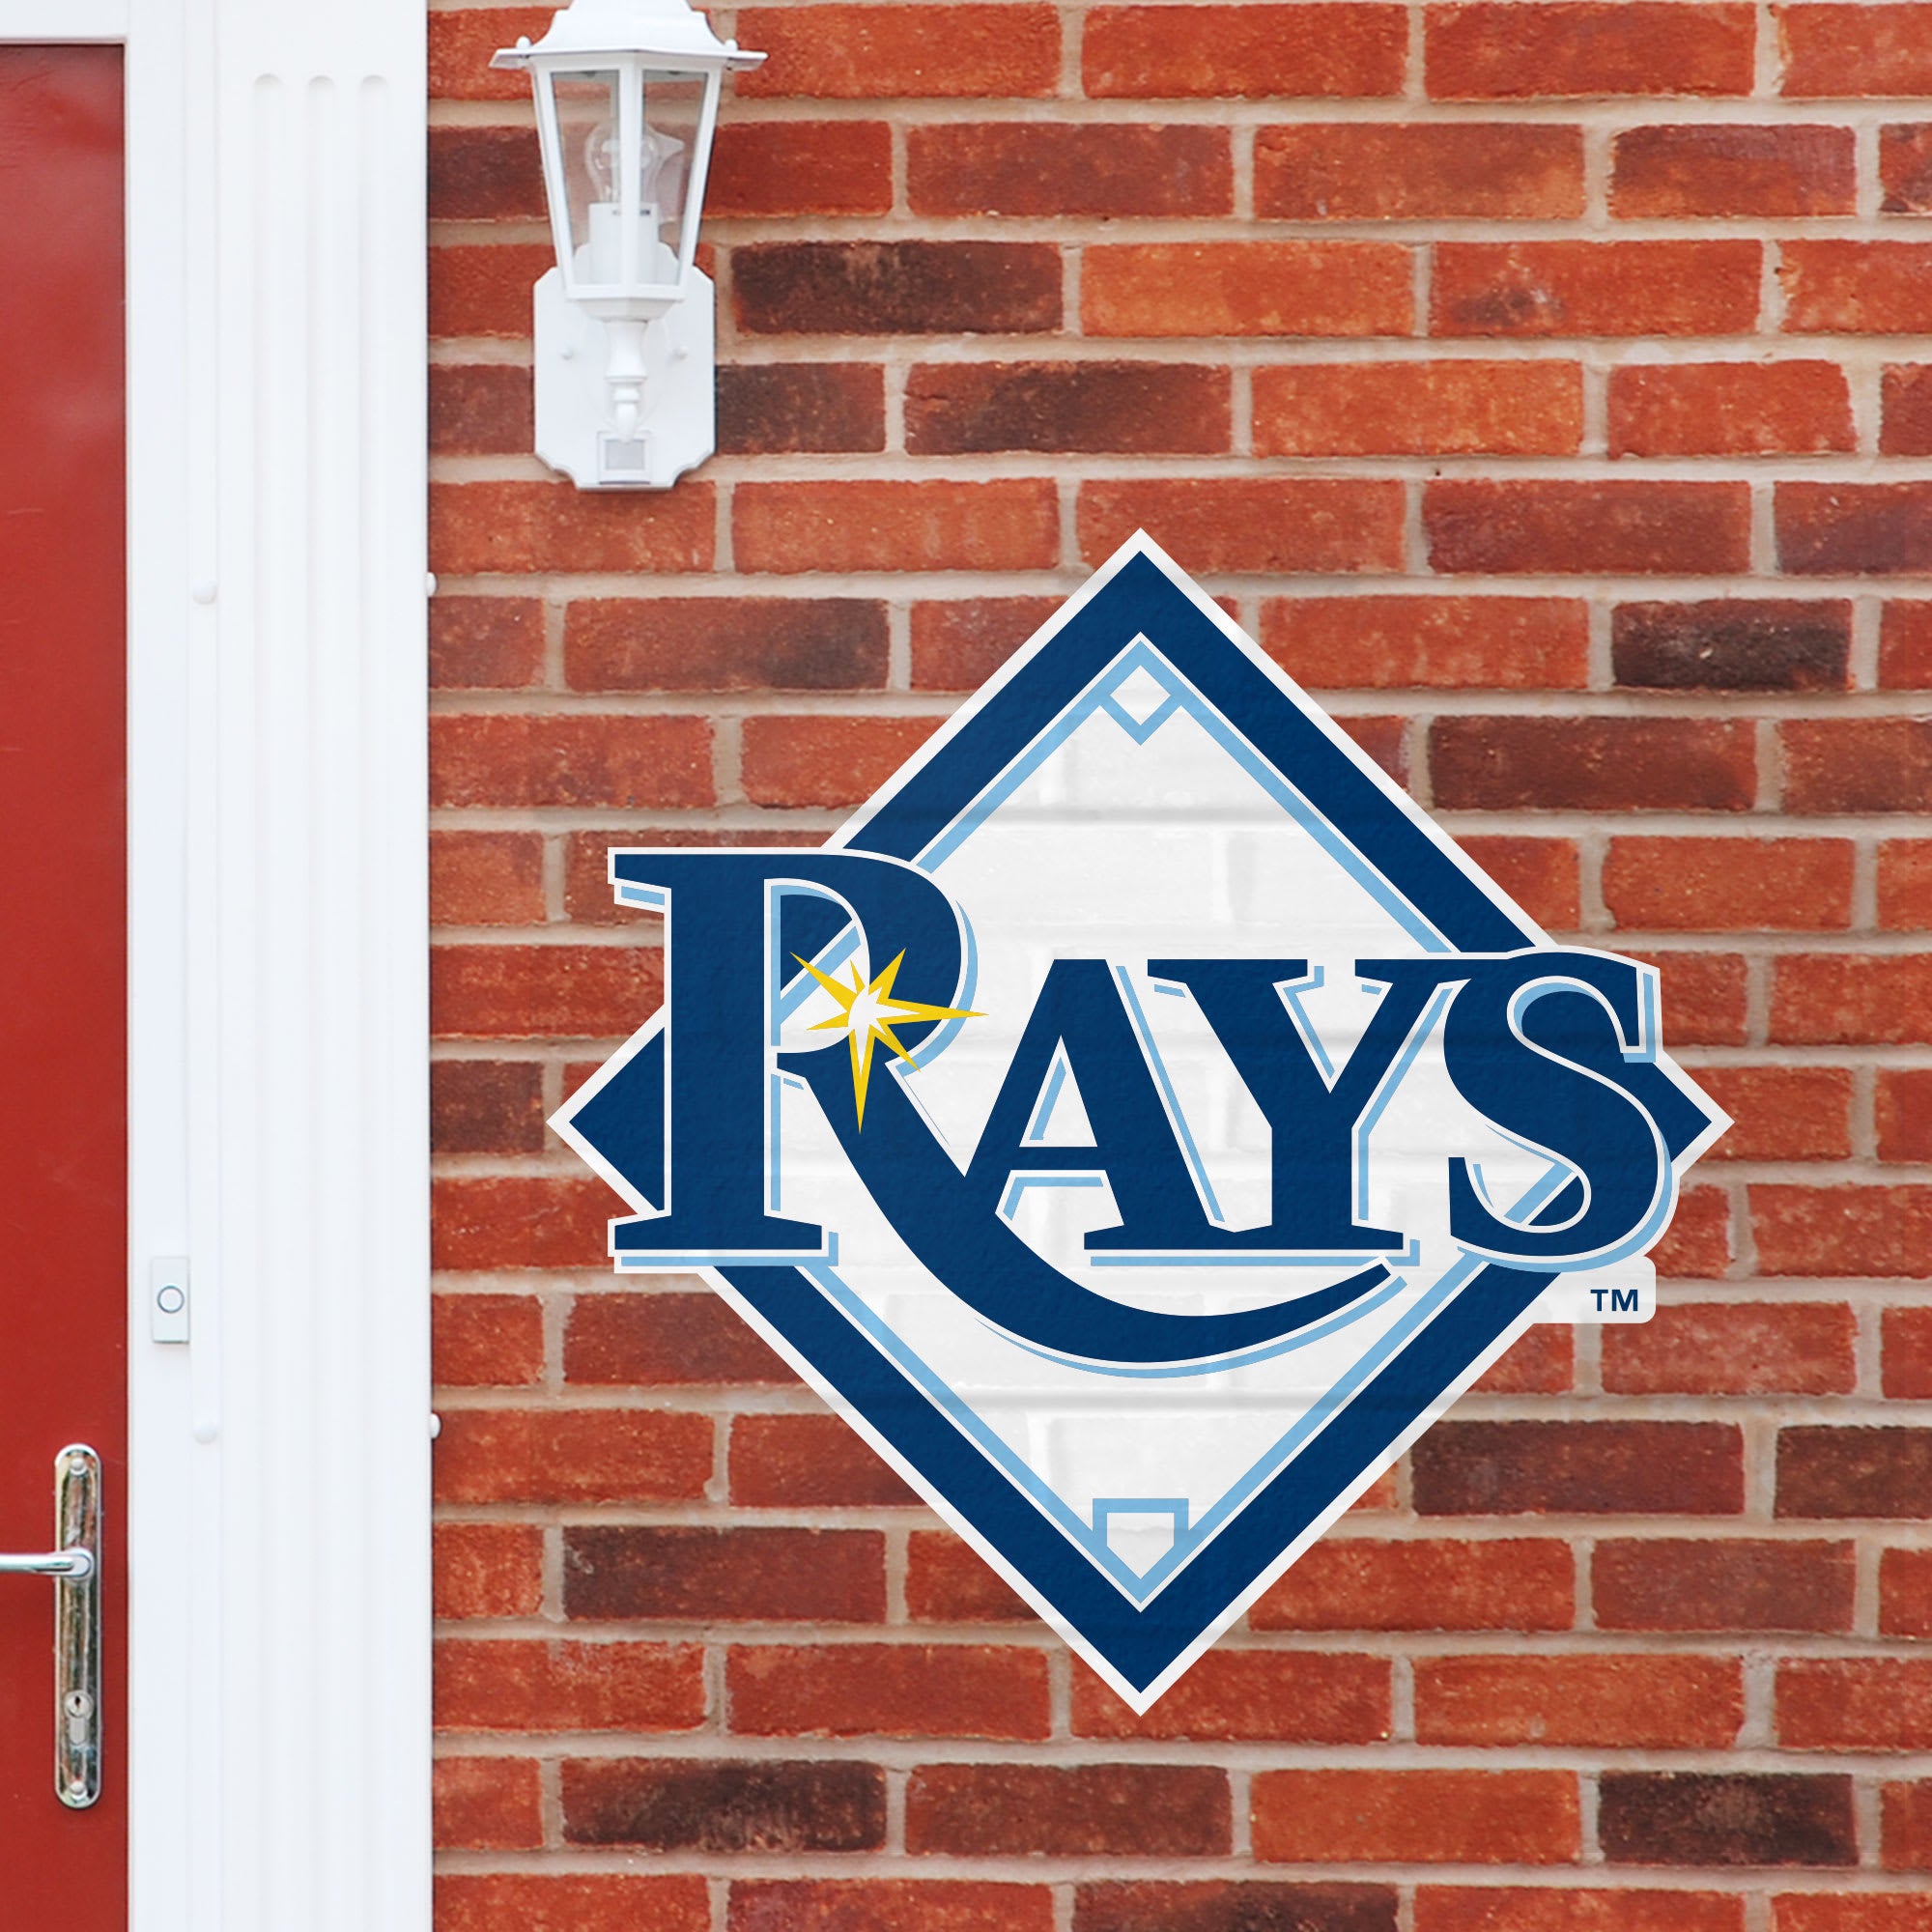 Tampa Bay Rays: Logo - Officially Licensed MLB Outdoor Graphic Giant Logo (30"W x 30"H) by Fathead | Wood/Aluminum